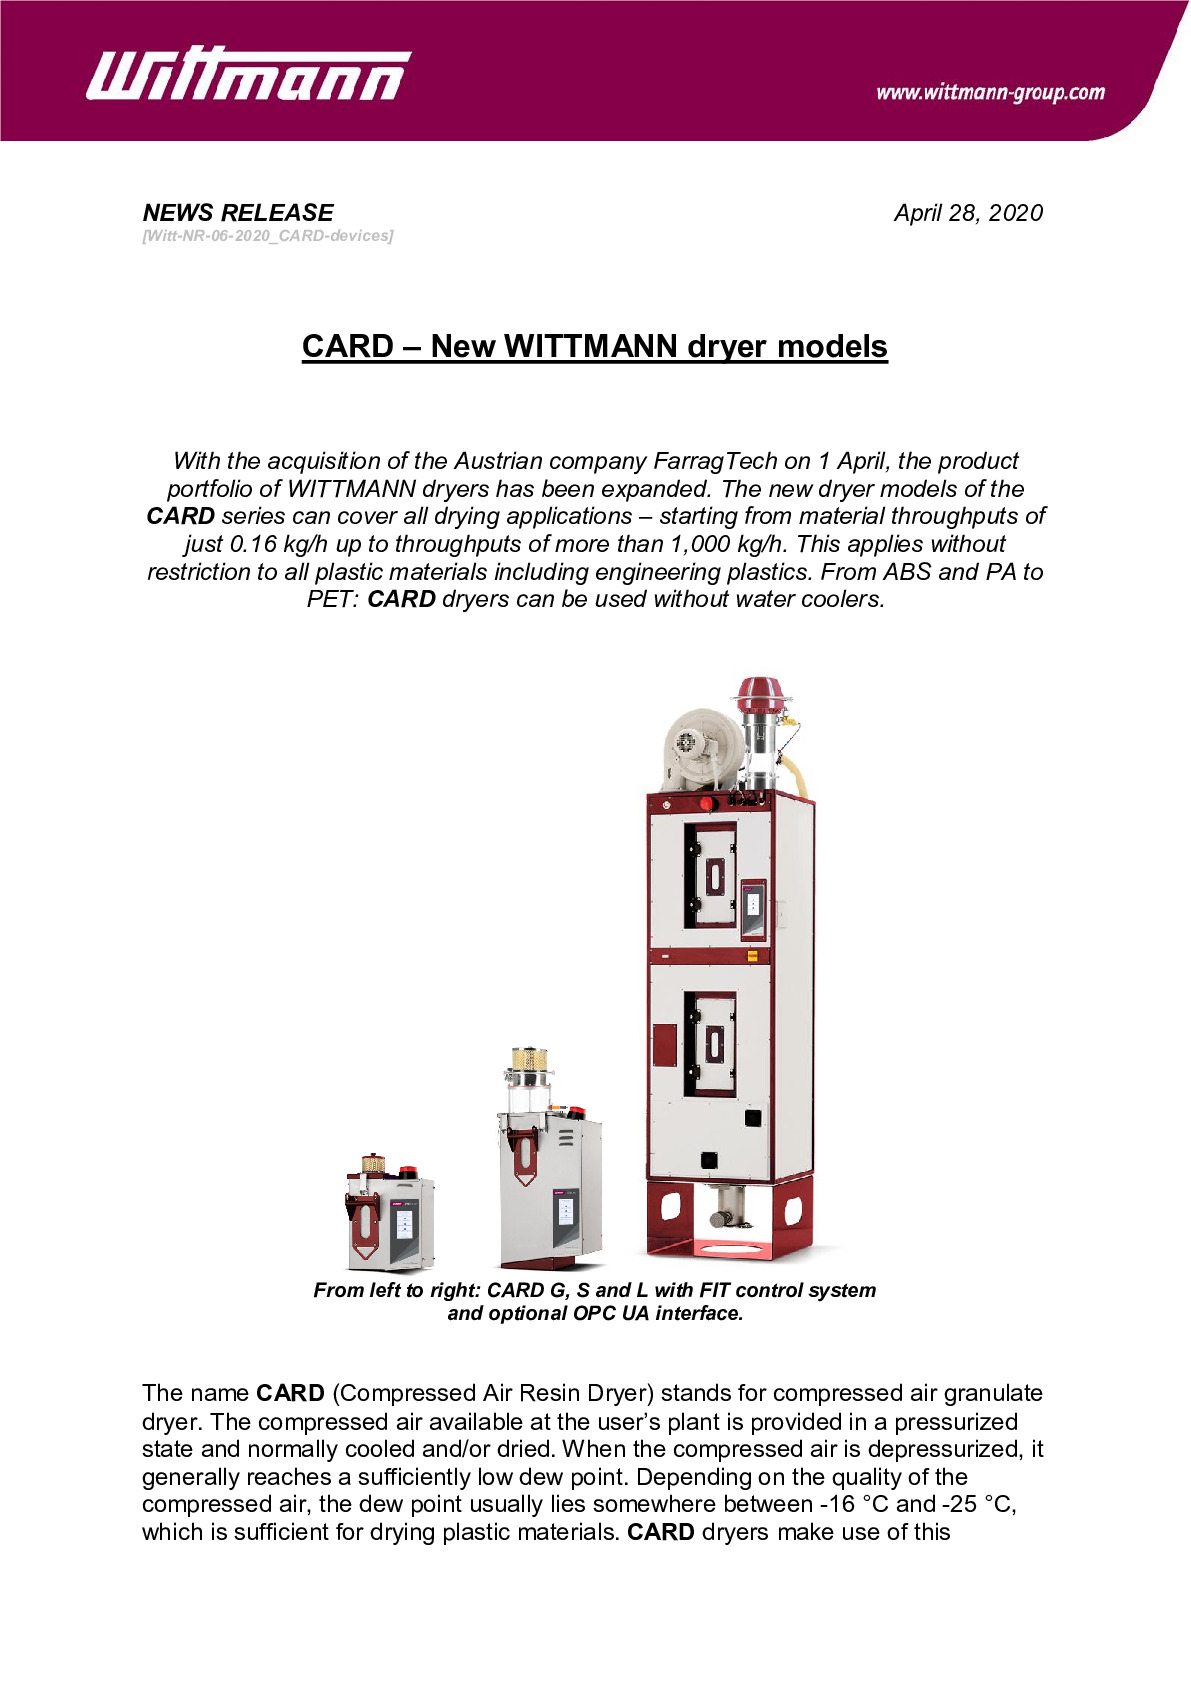 Wittman Battenfield Compress Air Resin Dryer Supports Adequate